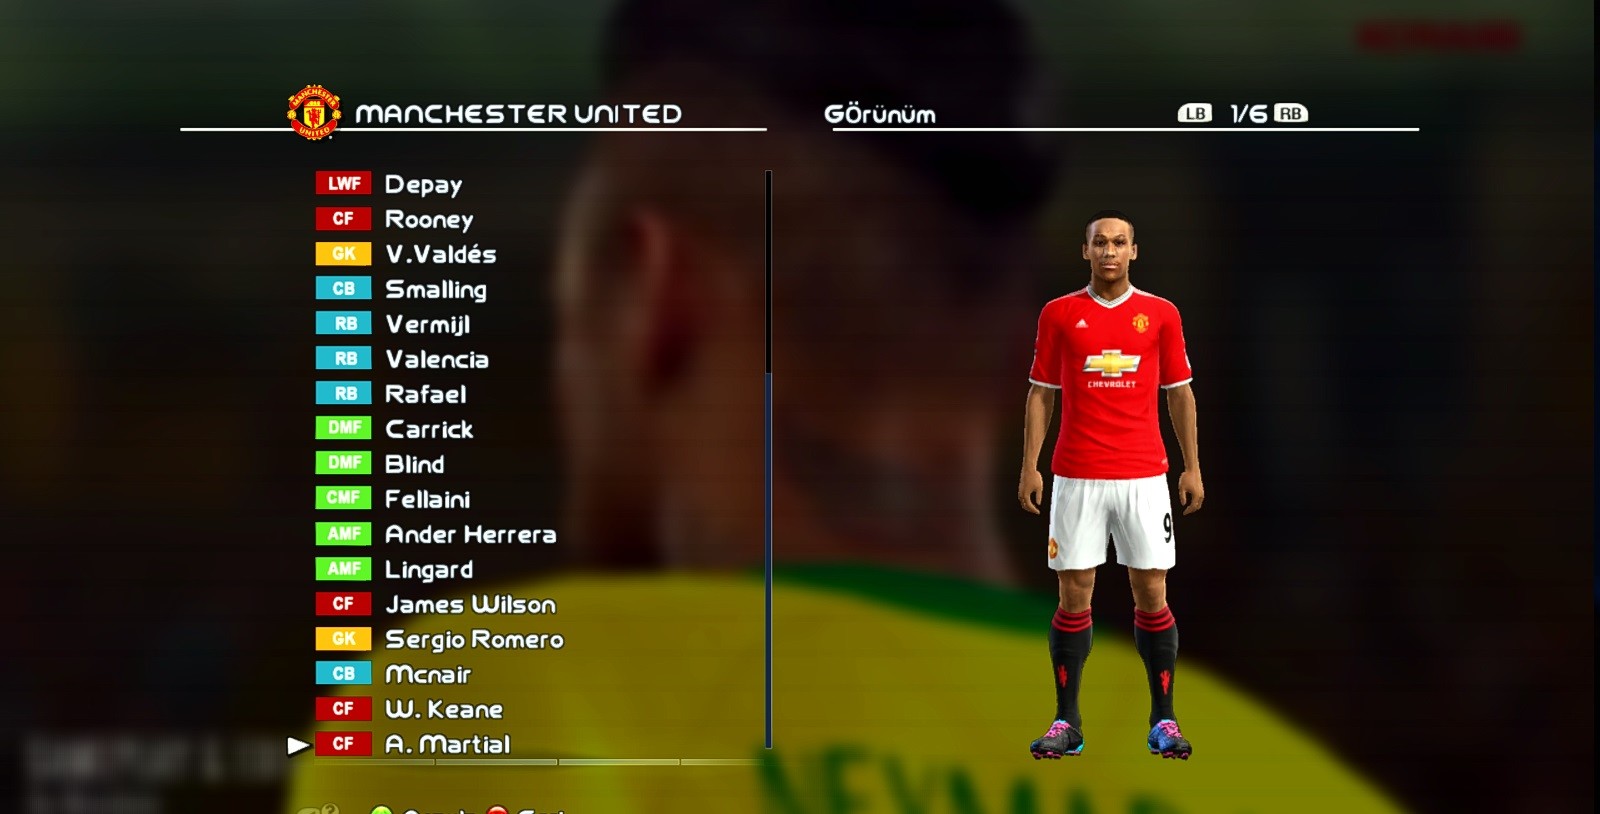 PES MODIF PES 2013 OPTION FILE NEW UPDATE 192015 By FERHAT SARKIN